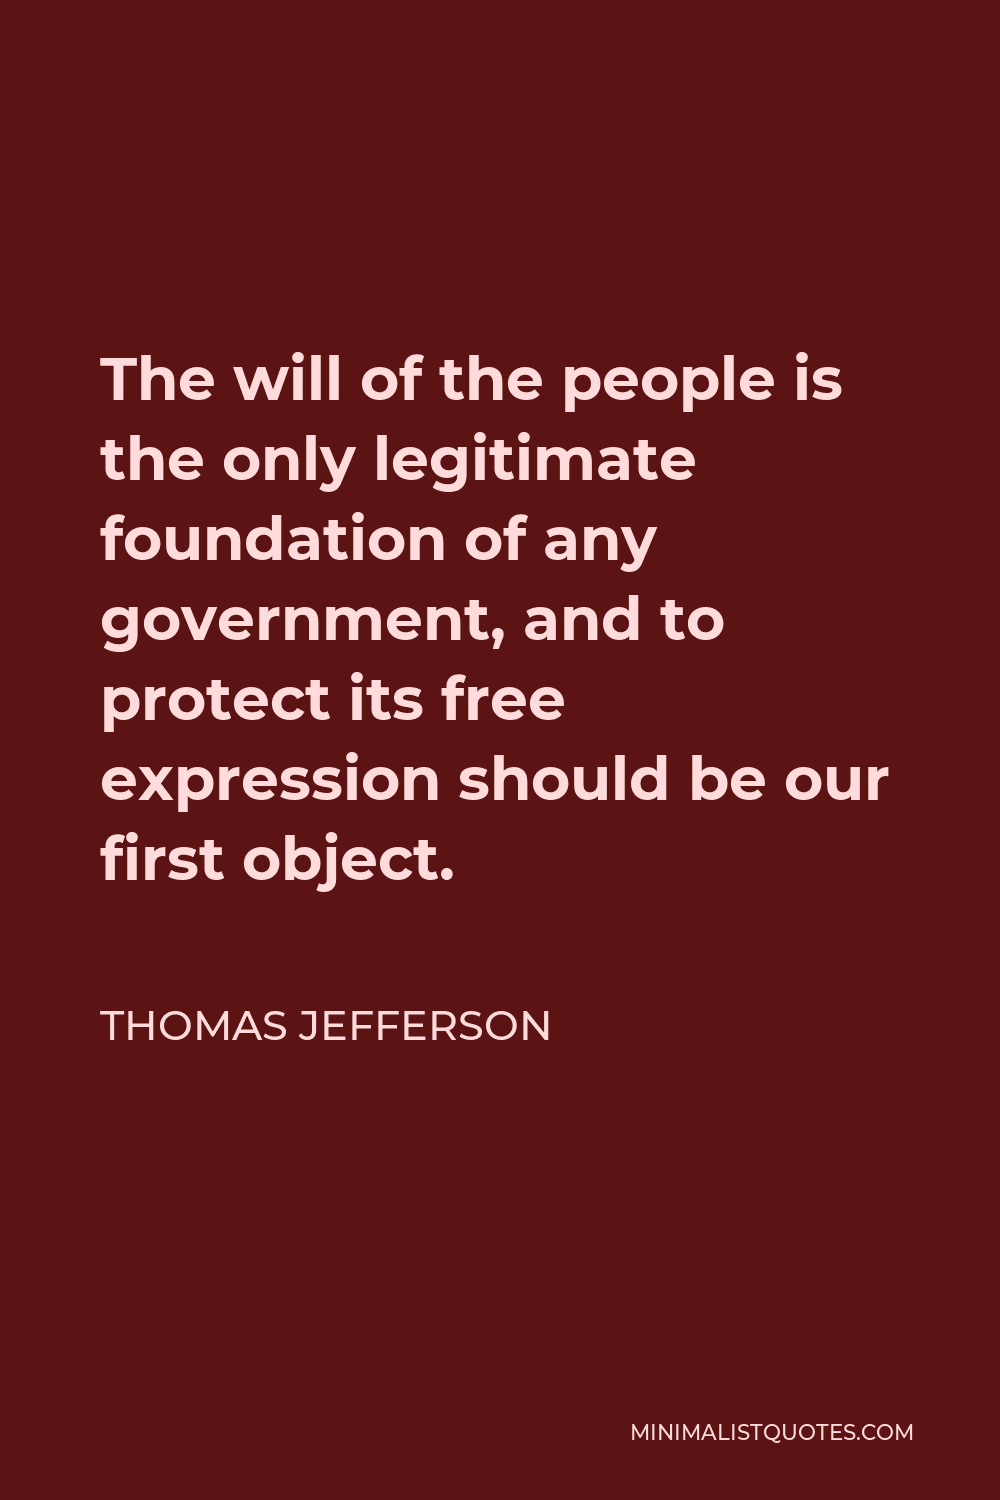 Thomas Jefferson Quote - The will of the people is the only legitimate foundation of any government, and to protect its free expression should be our first object.